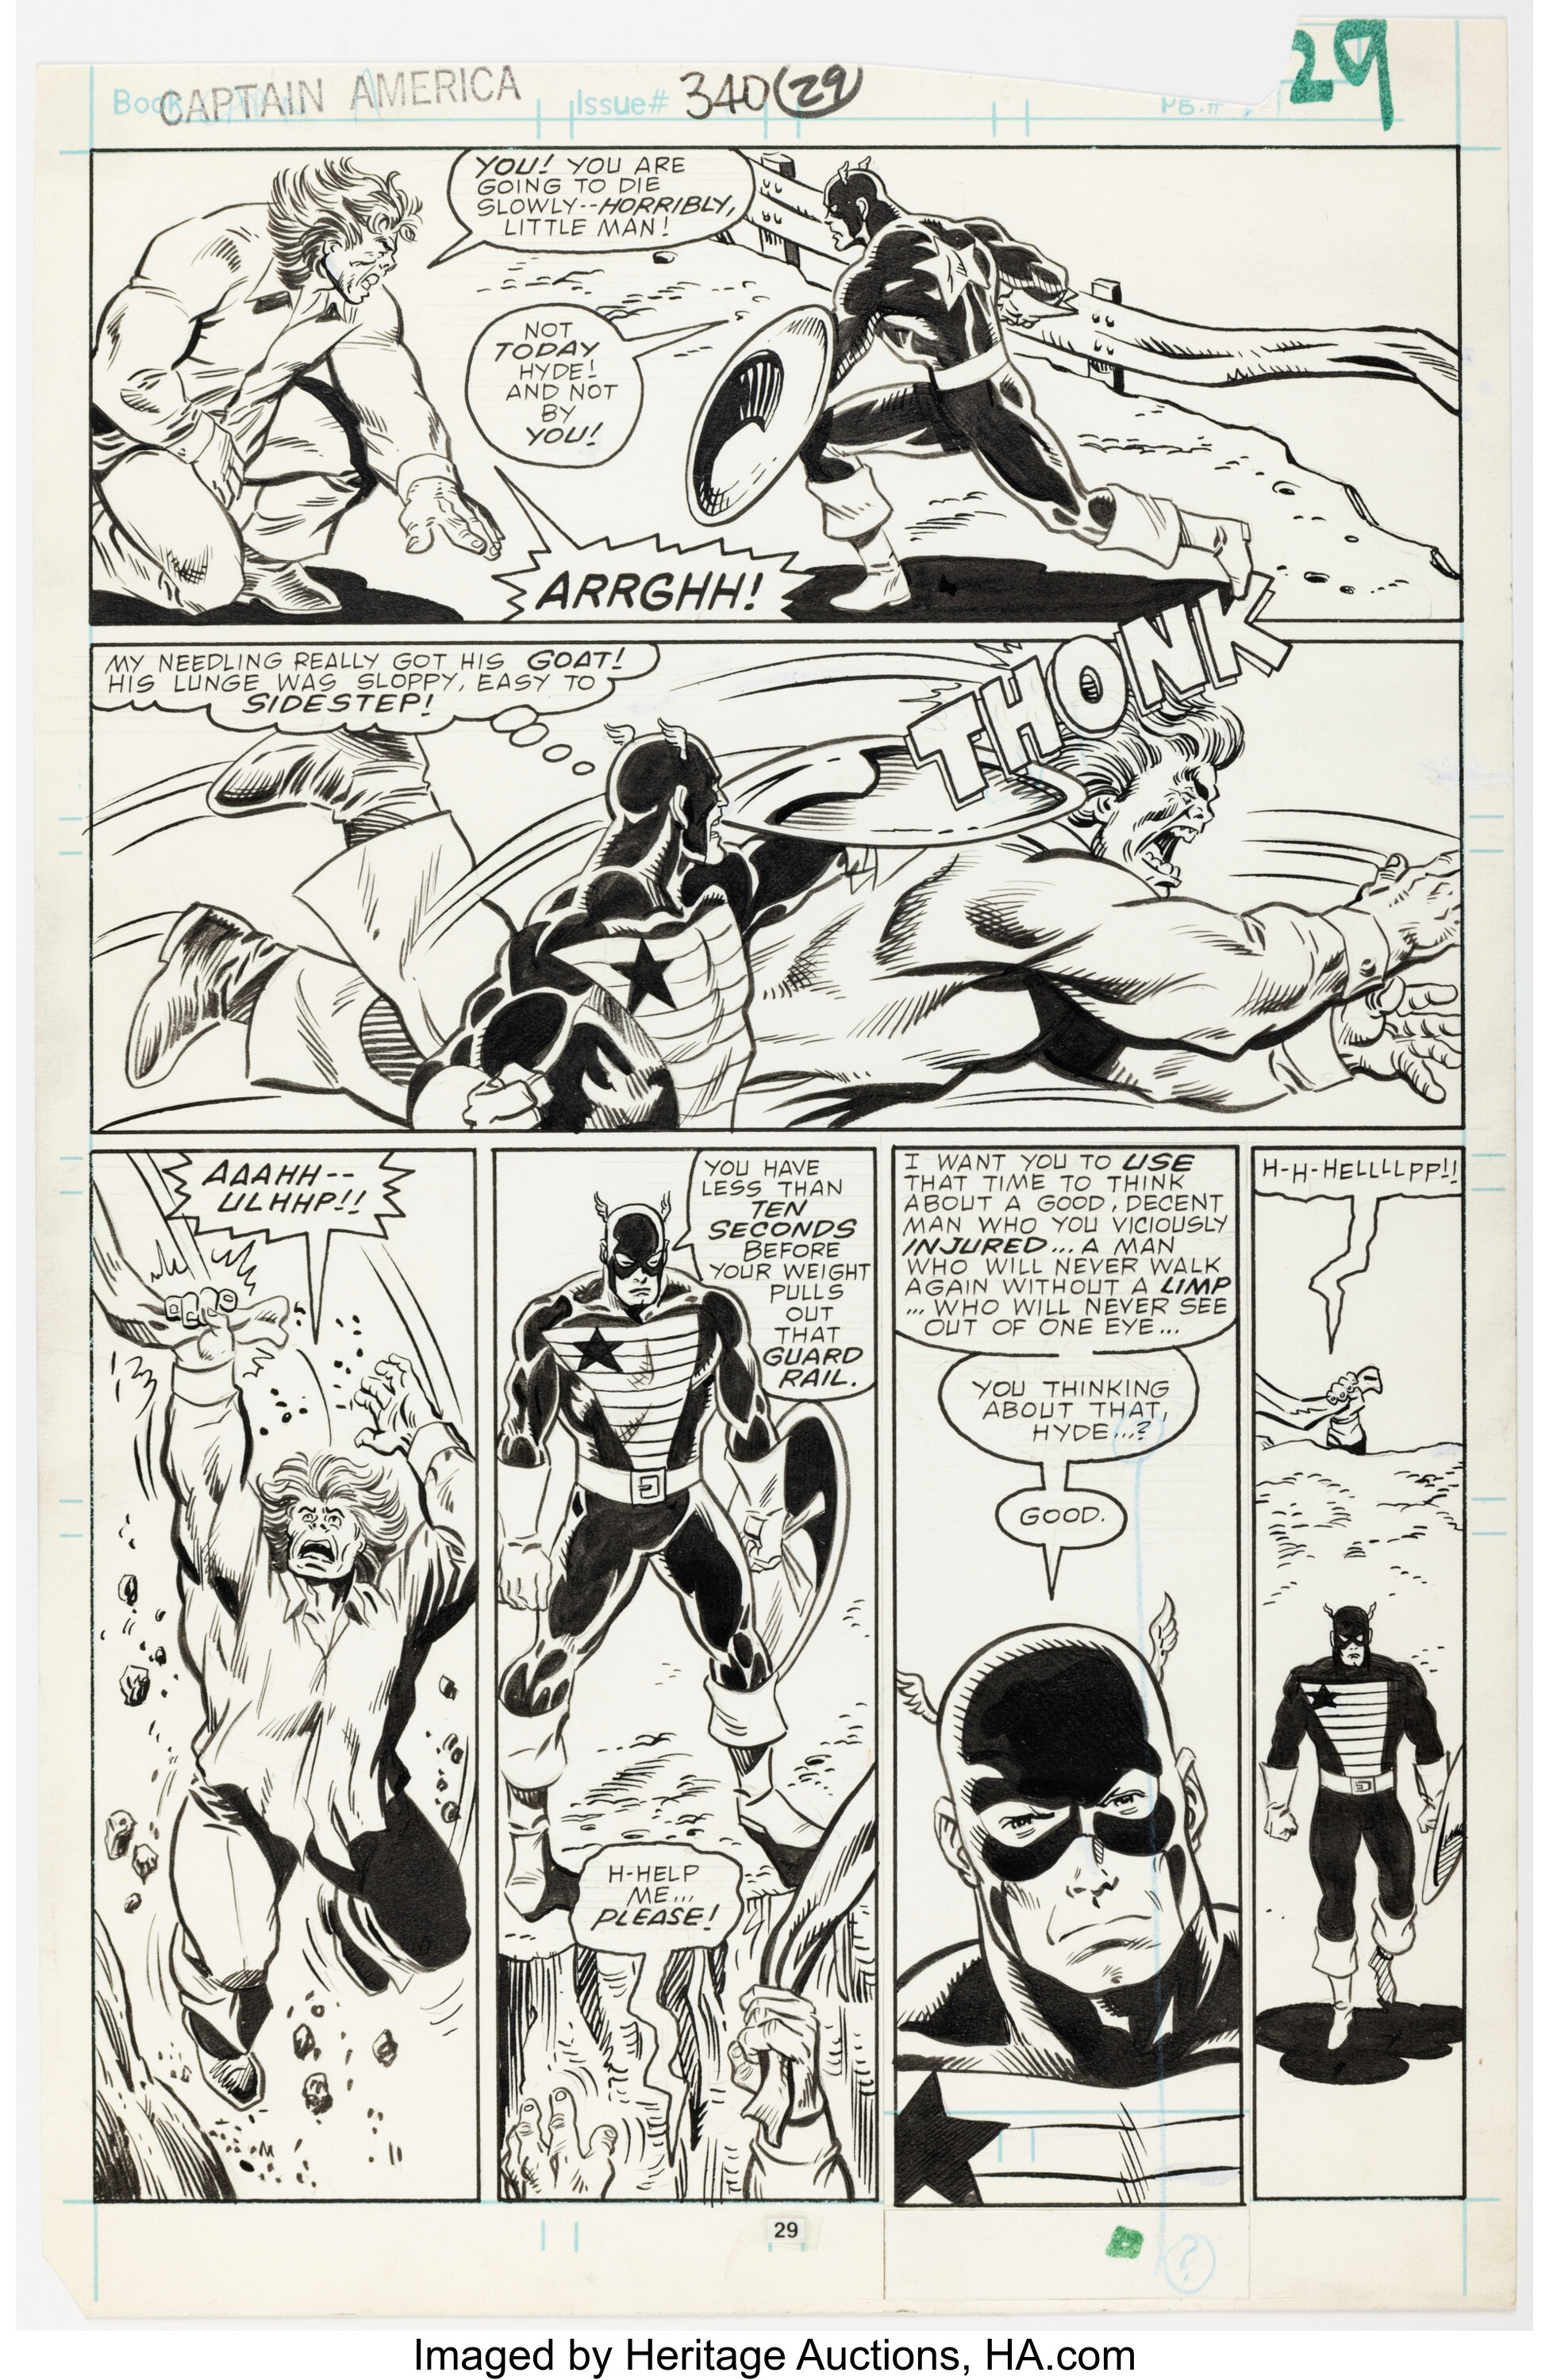 Kieron Dwyer And Al Milgrom Captain America 340 Story Page 21 Lotid 38009 Heritage Auctions 0585